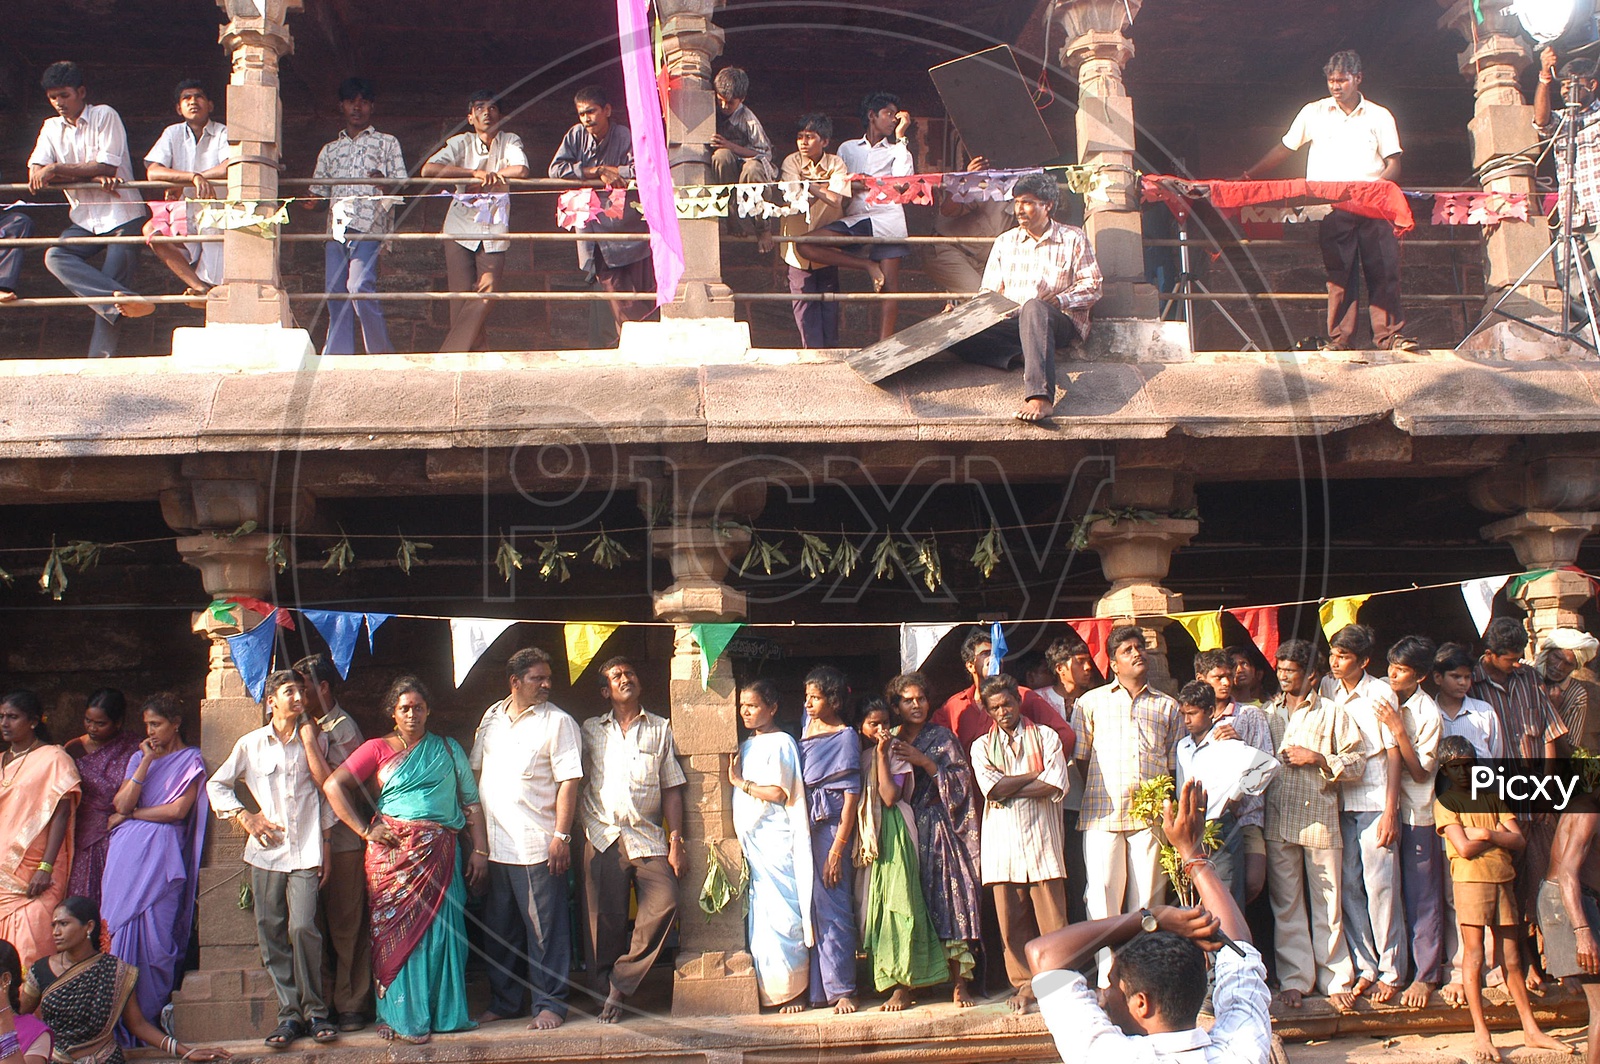 Telugu Movie Song Shooting in a Temple